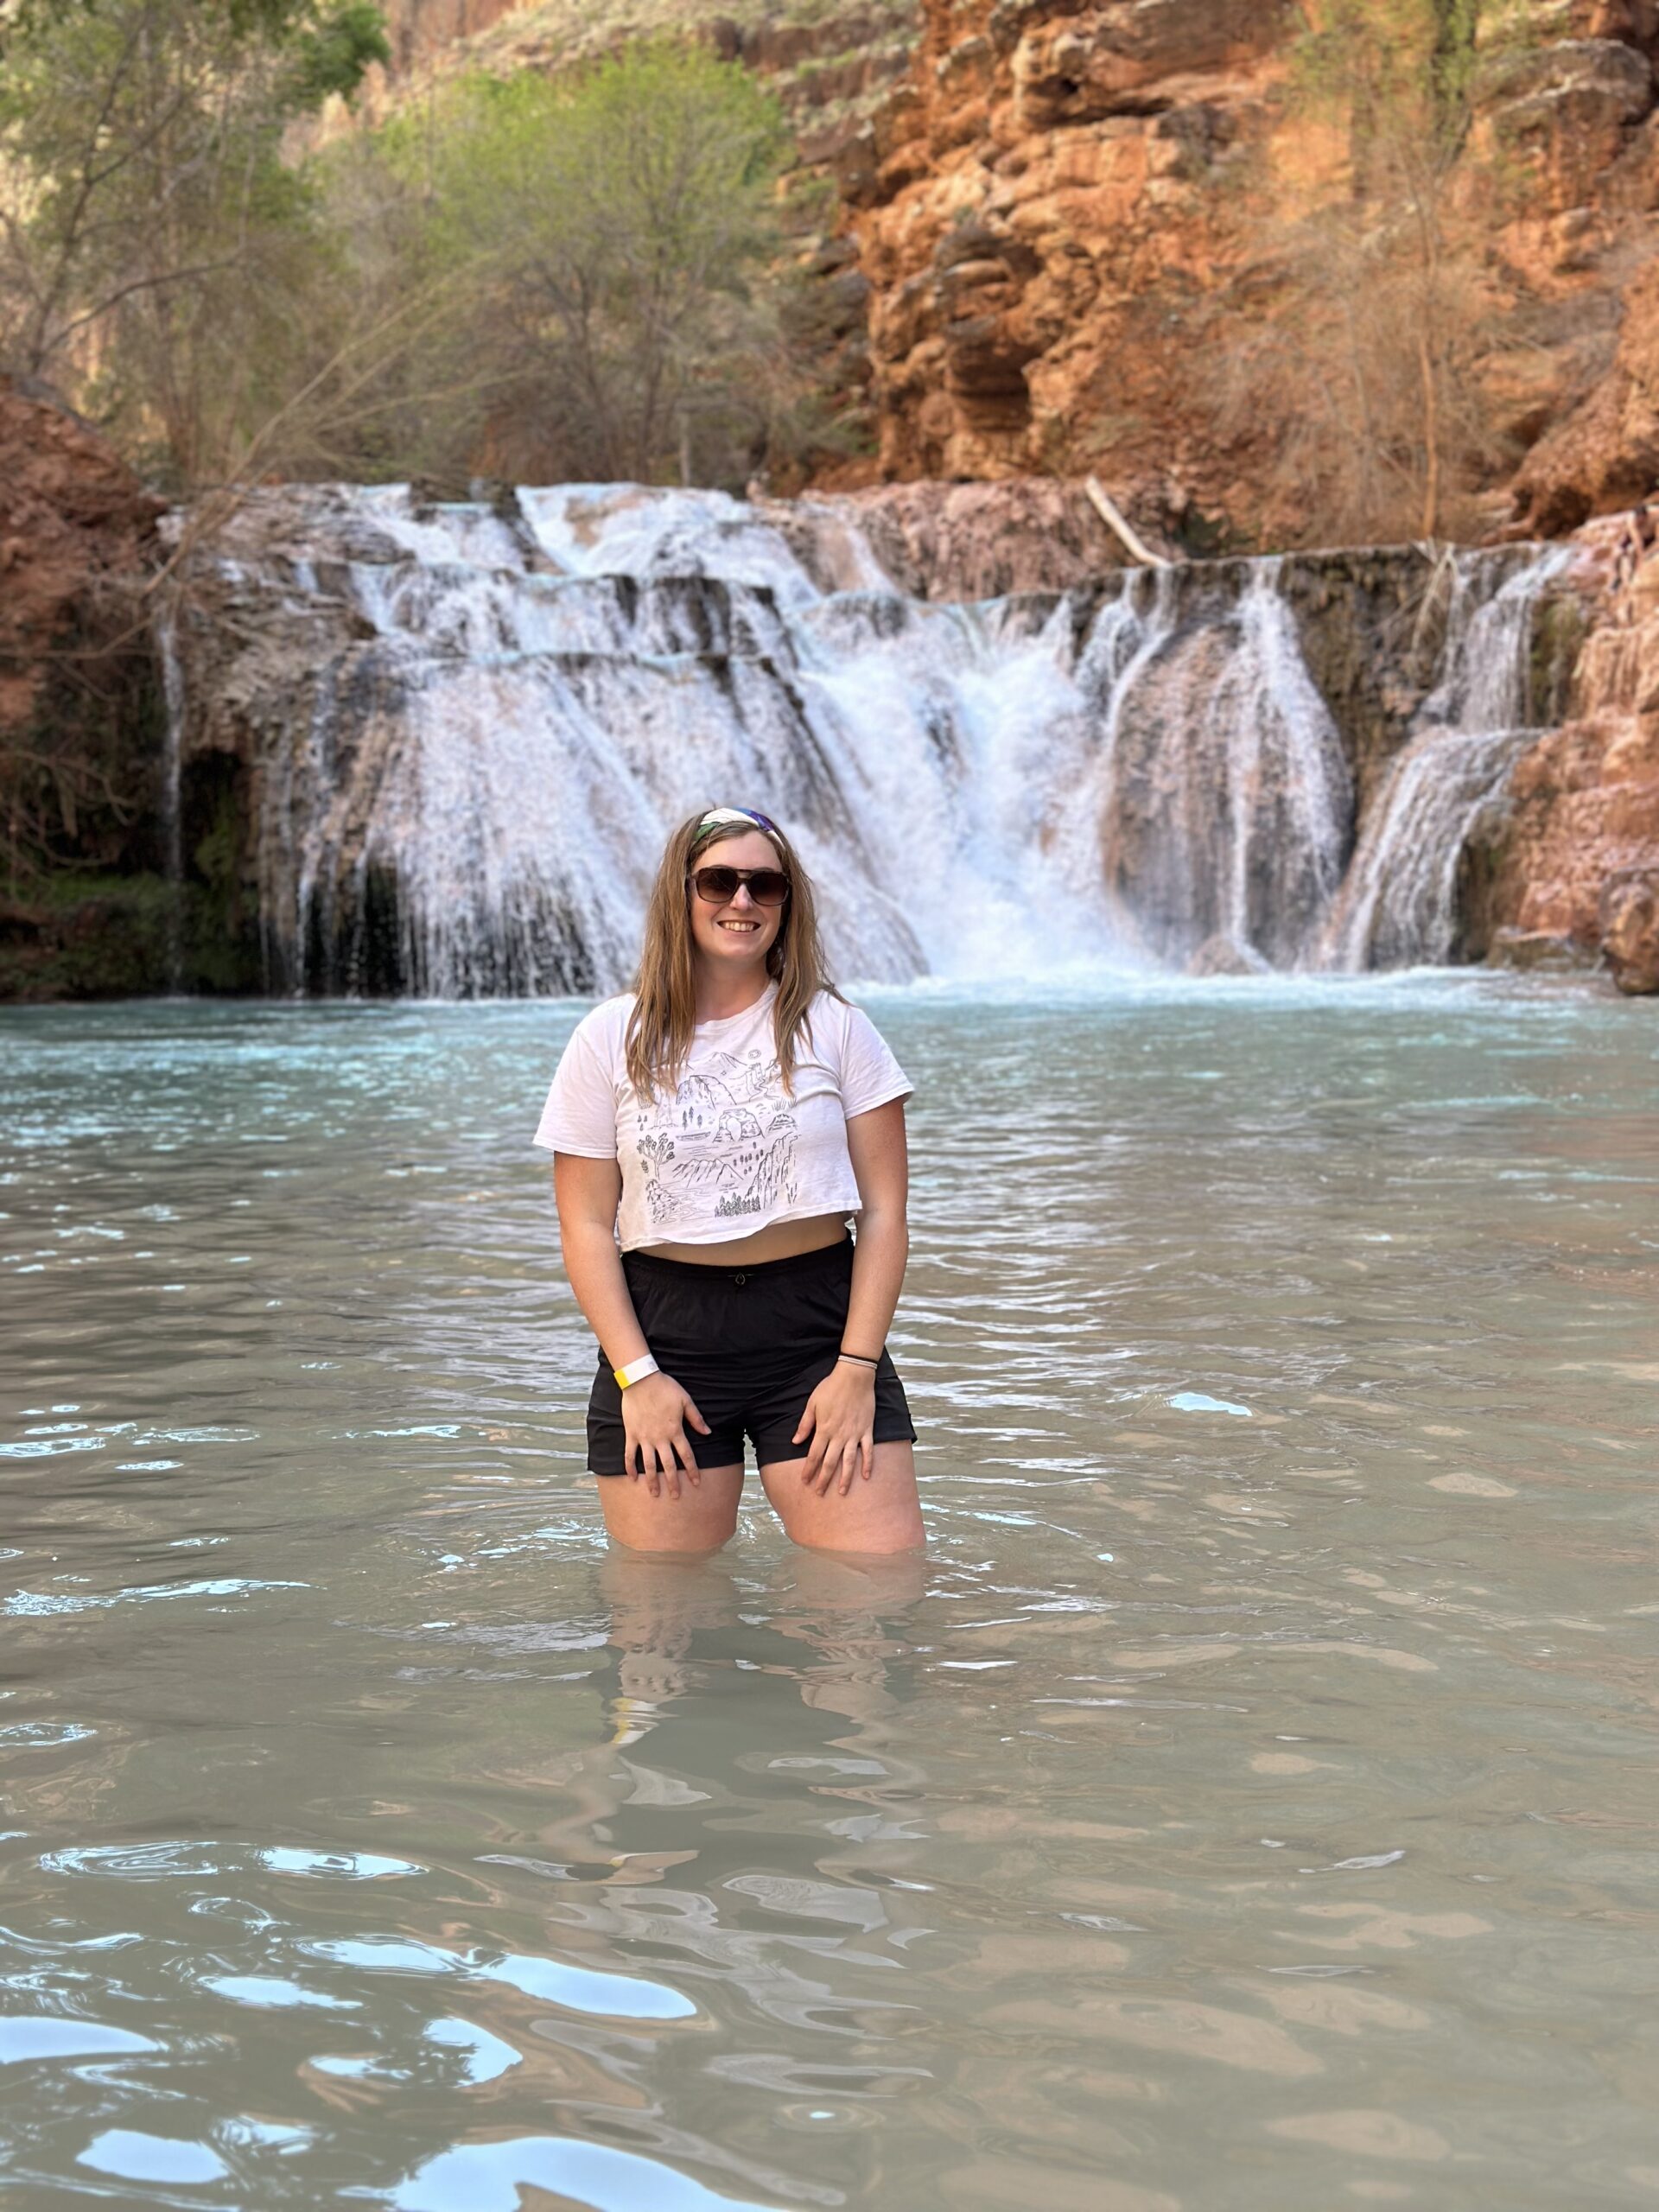 Girl Standing in Water by a Waterfall